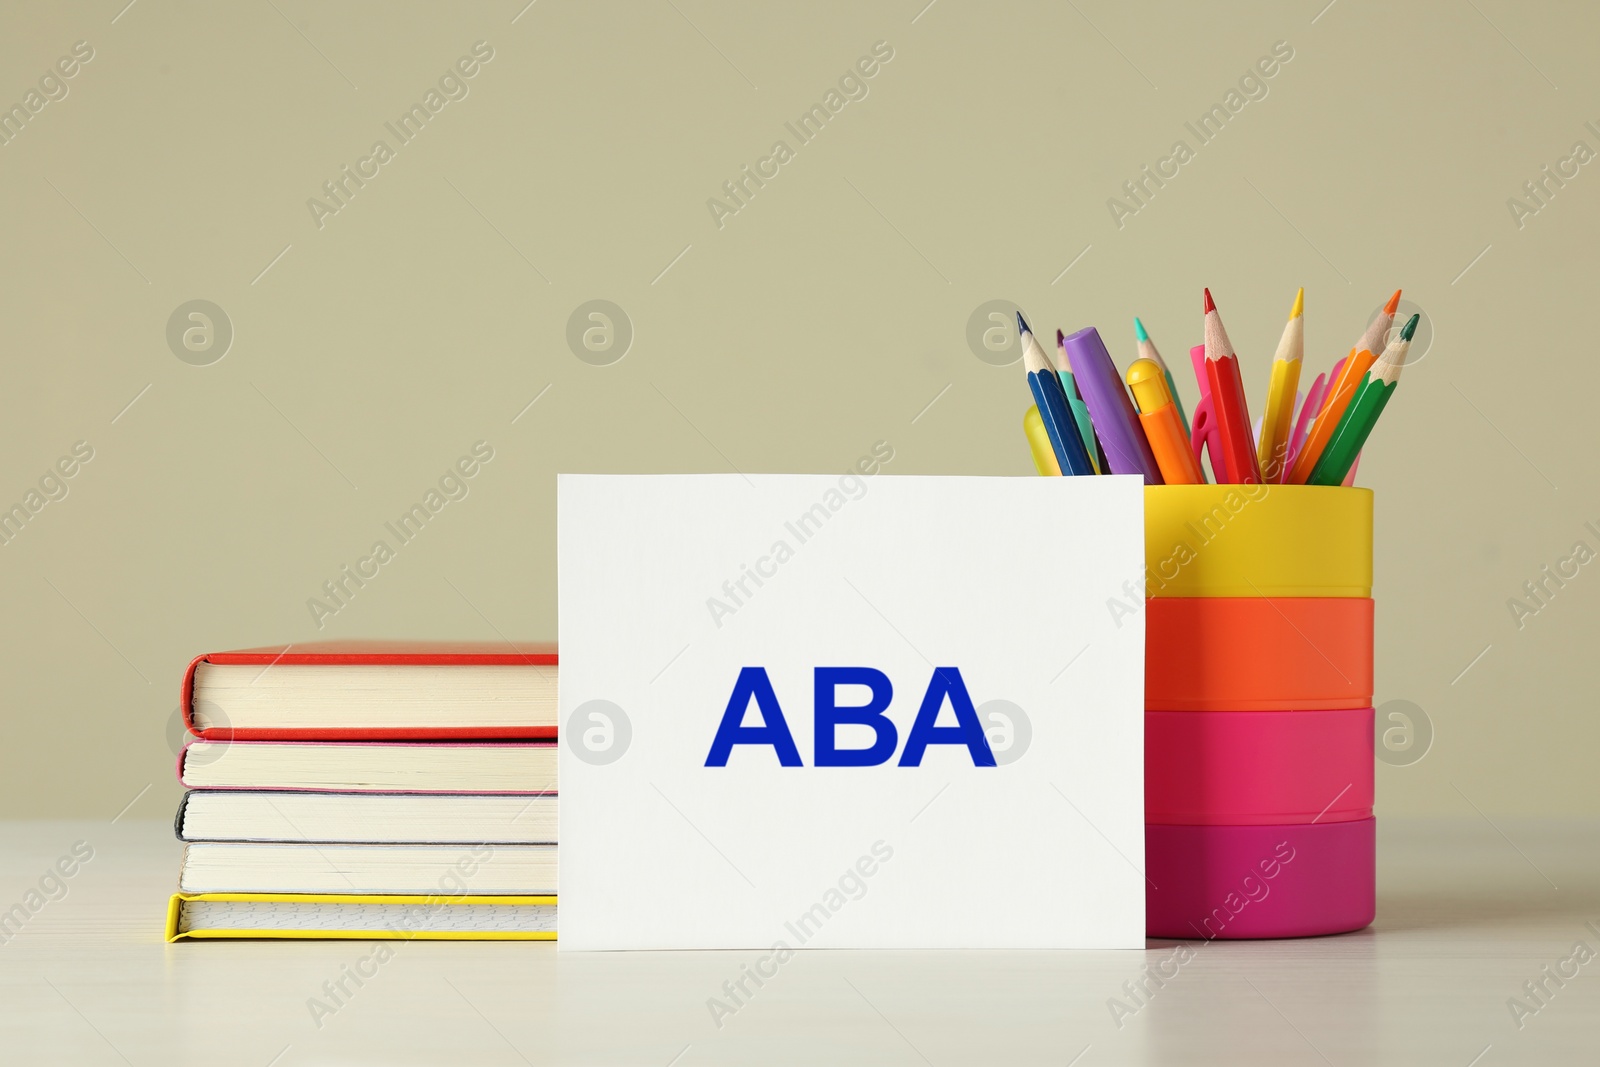 Photo of Set of stationery and card with abbreviation ABA (Applied Behavior Analysis) on wooden table against beige background